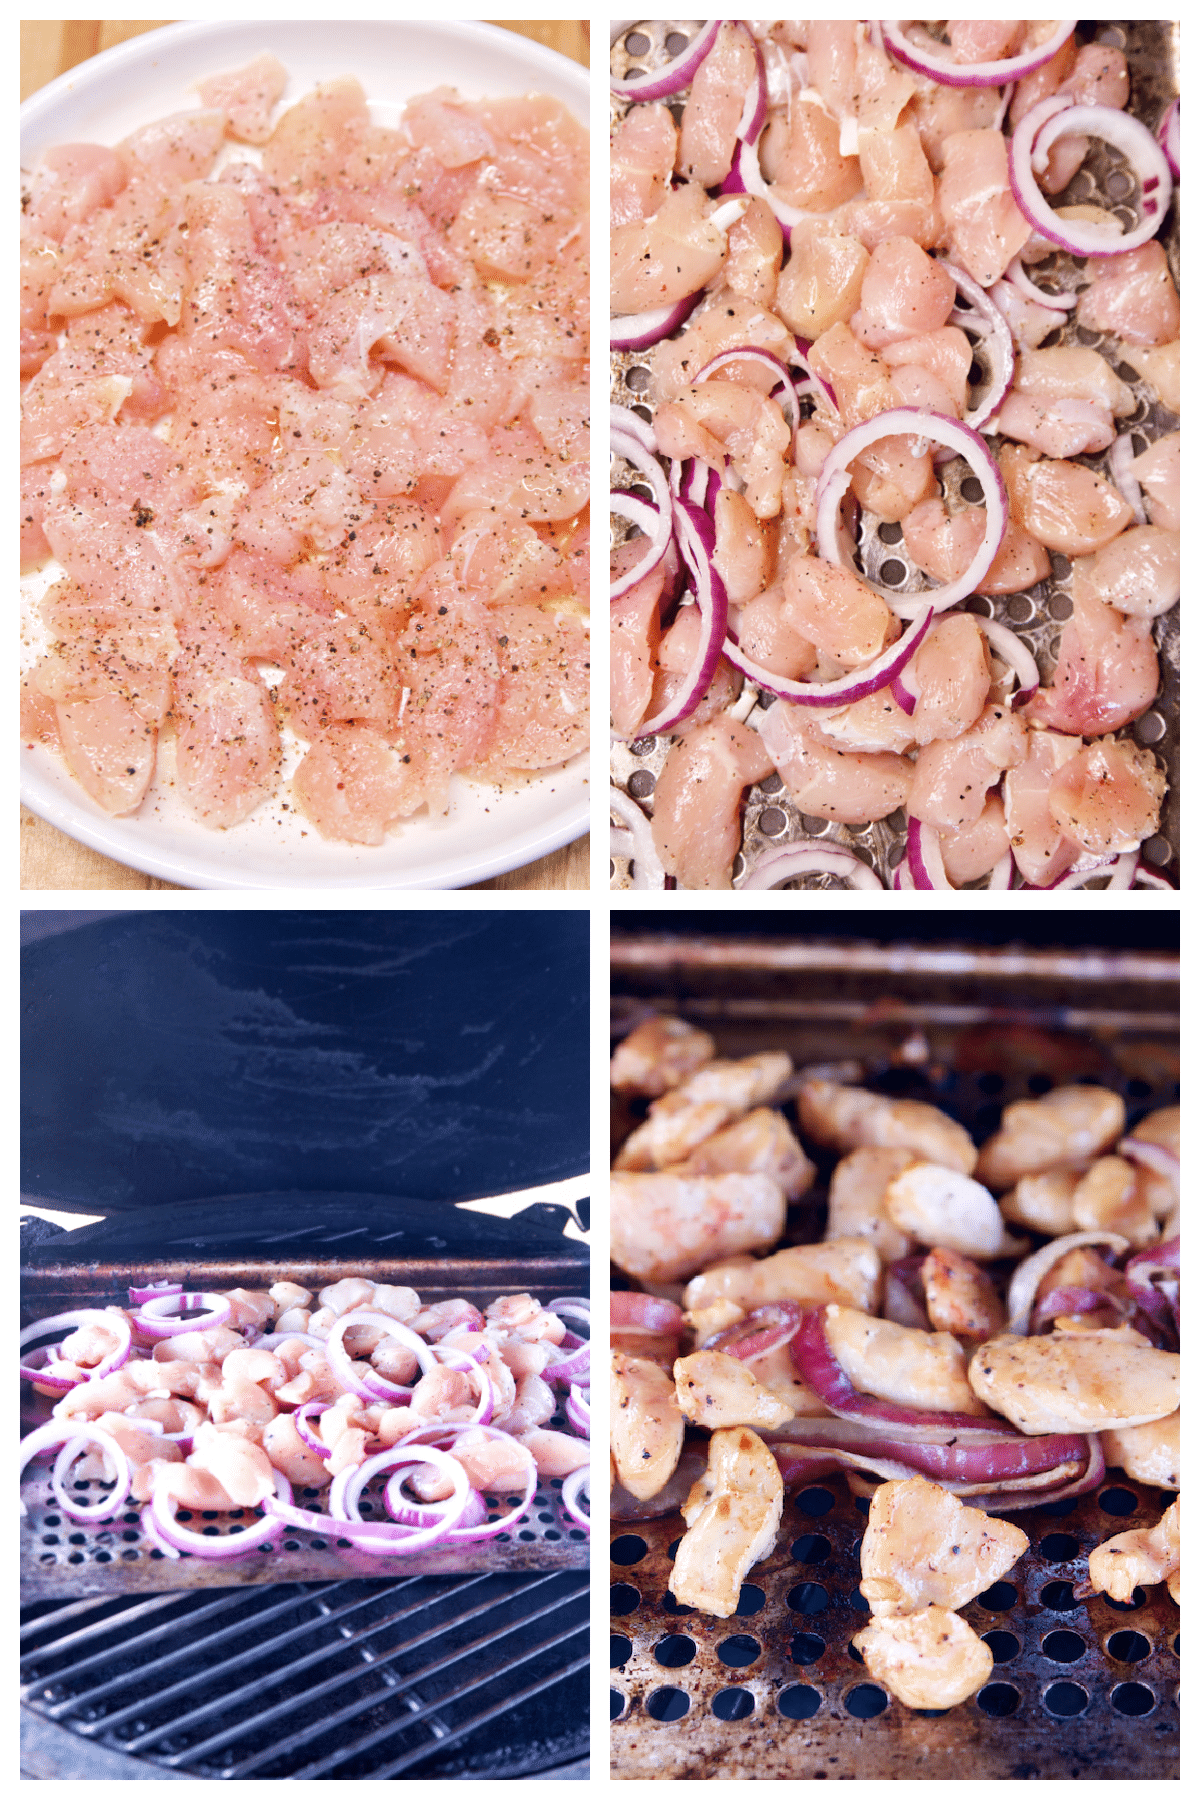 Collage chicken pieces, seasoned, mixed with red onion, grilling.